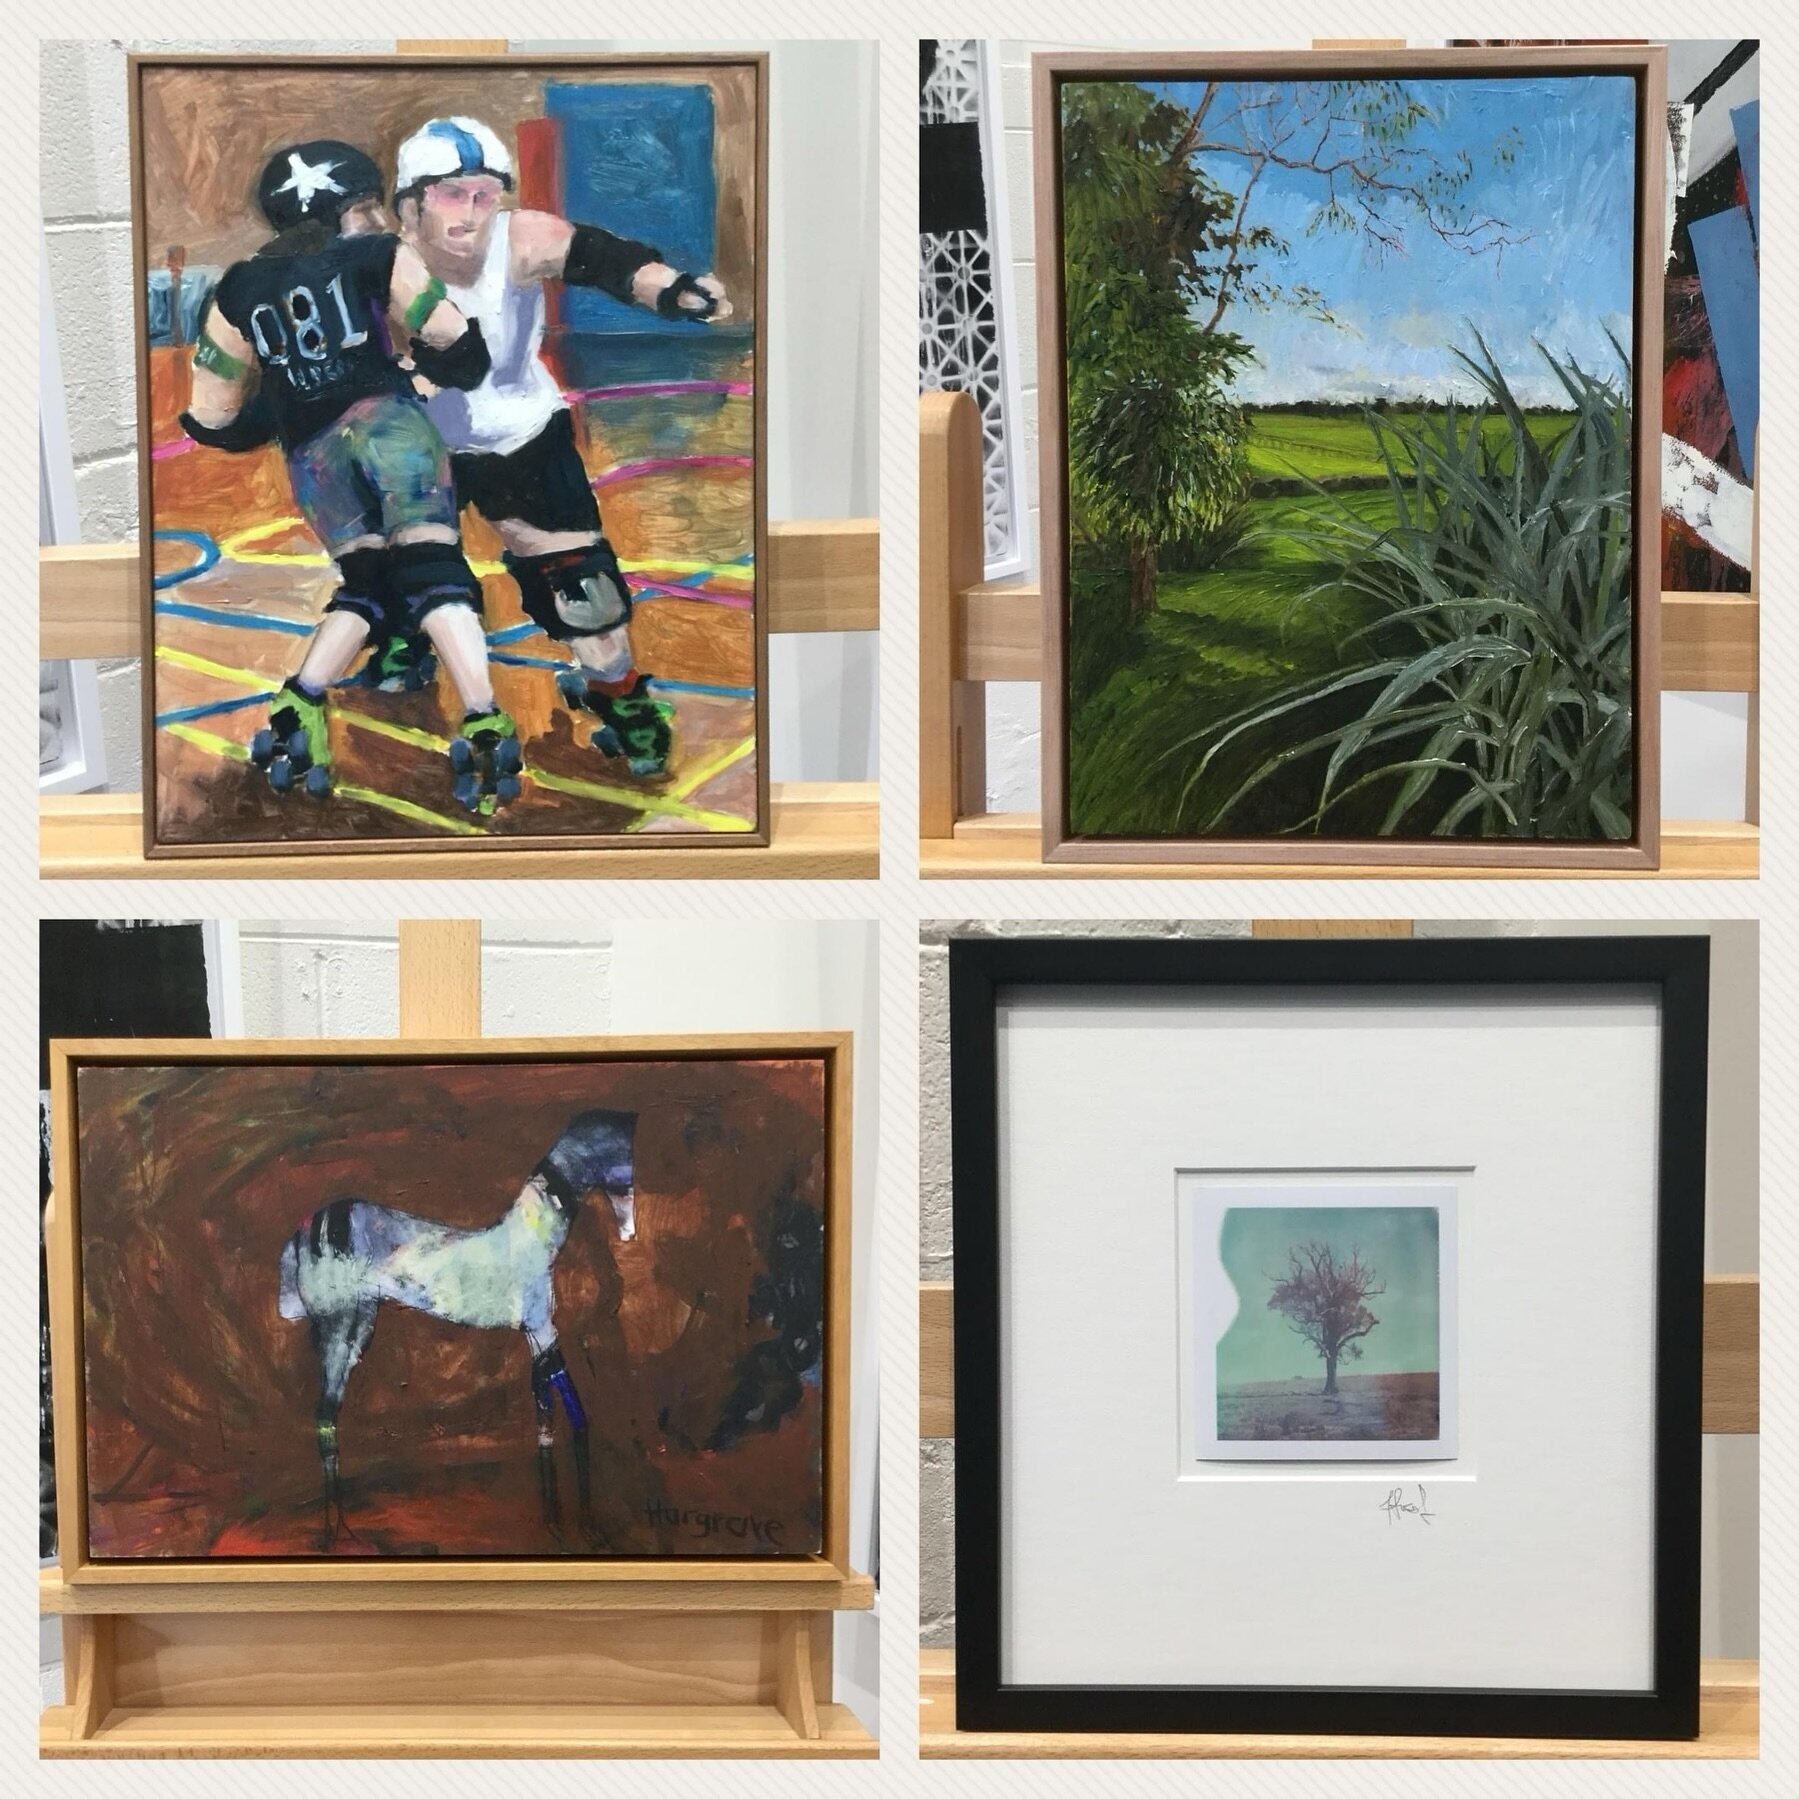 This week&rsquo;s Facebook showcase is a fantastic little view of artworks past and present.
From our talented local artists, to older artworks getting a modern framing make over,  this showcase is simply a wonderful example of unique pieces ready to